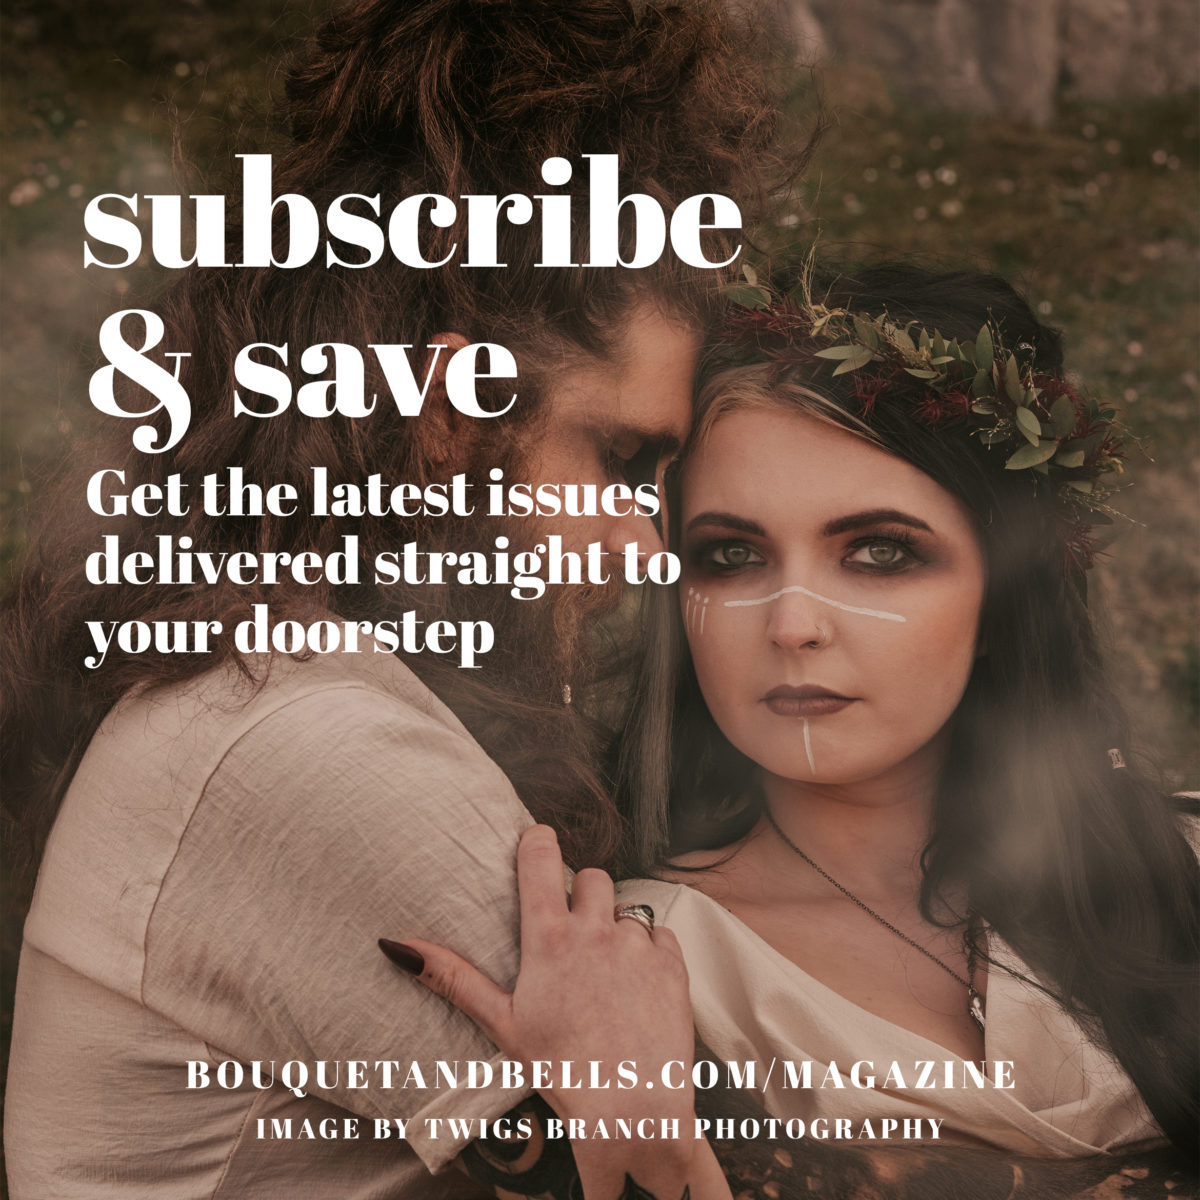 bouquet-and-bells-wedding-magazine-issue-04-autumn-winter-subscribe-subscription-2021